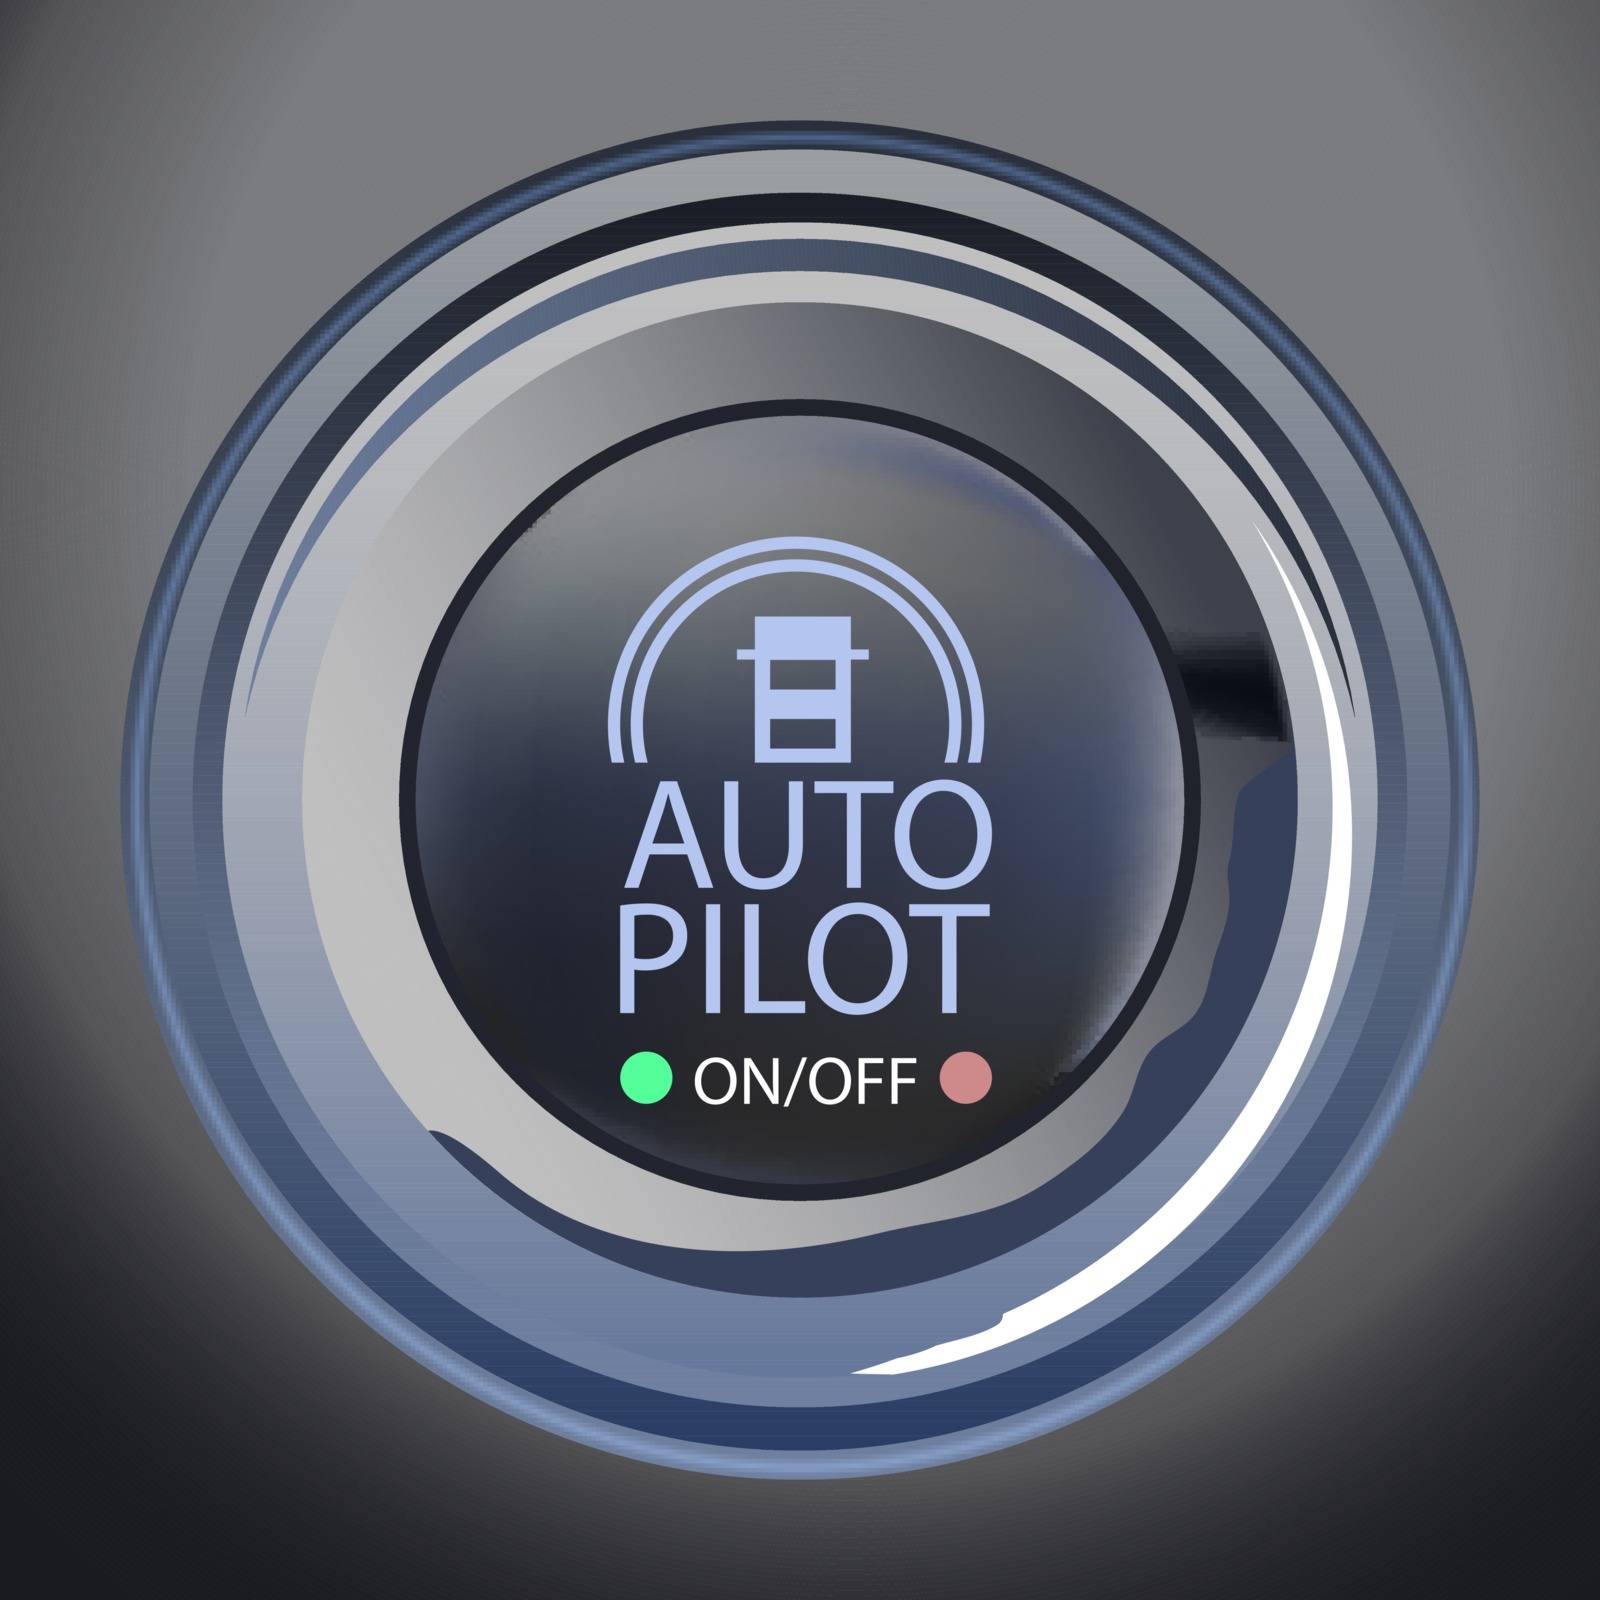 Vector Illustration of Autopilot Button, Eps10 Vector, Transparency and Gradient Mesh Used